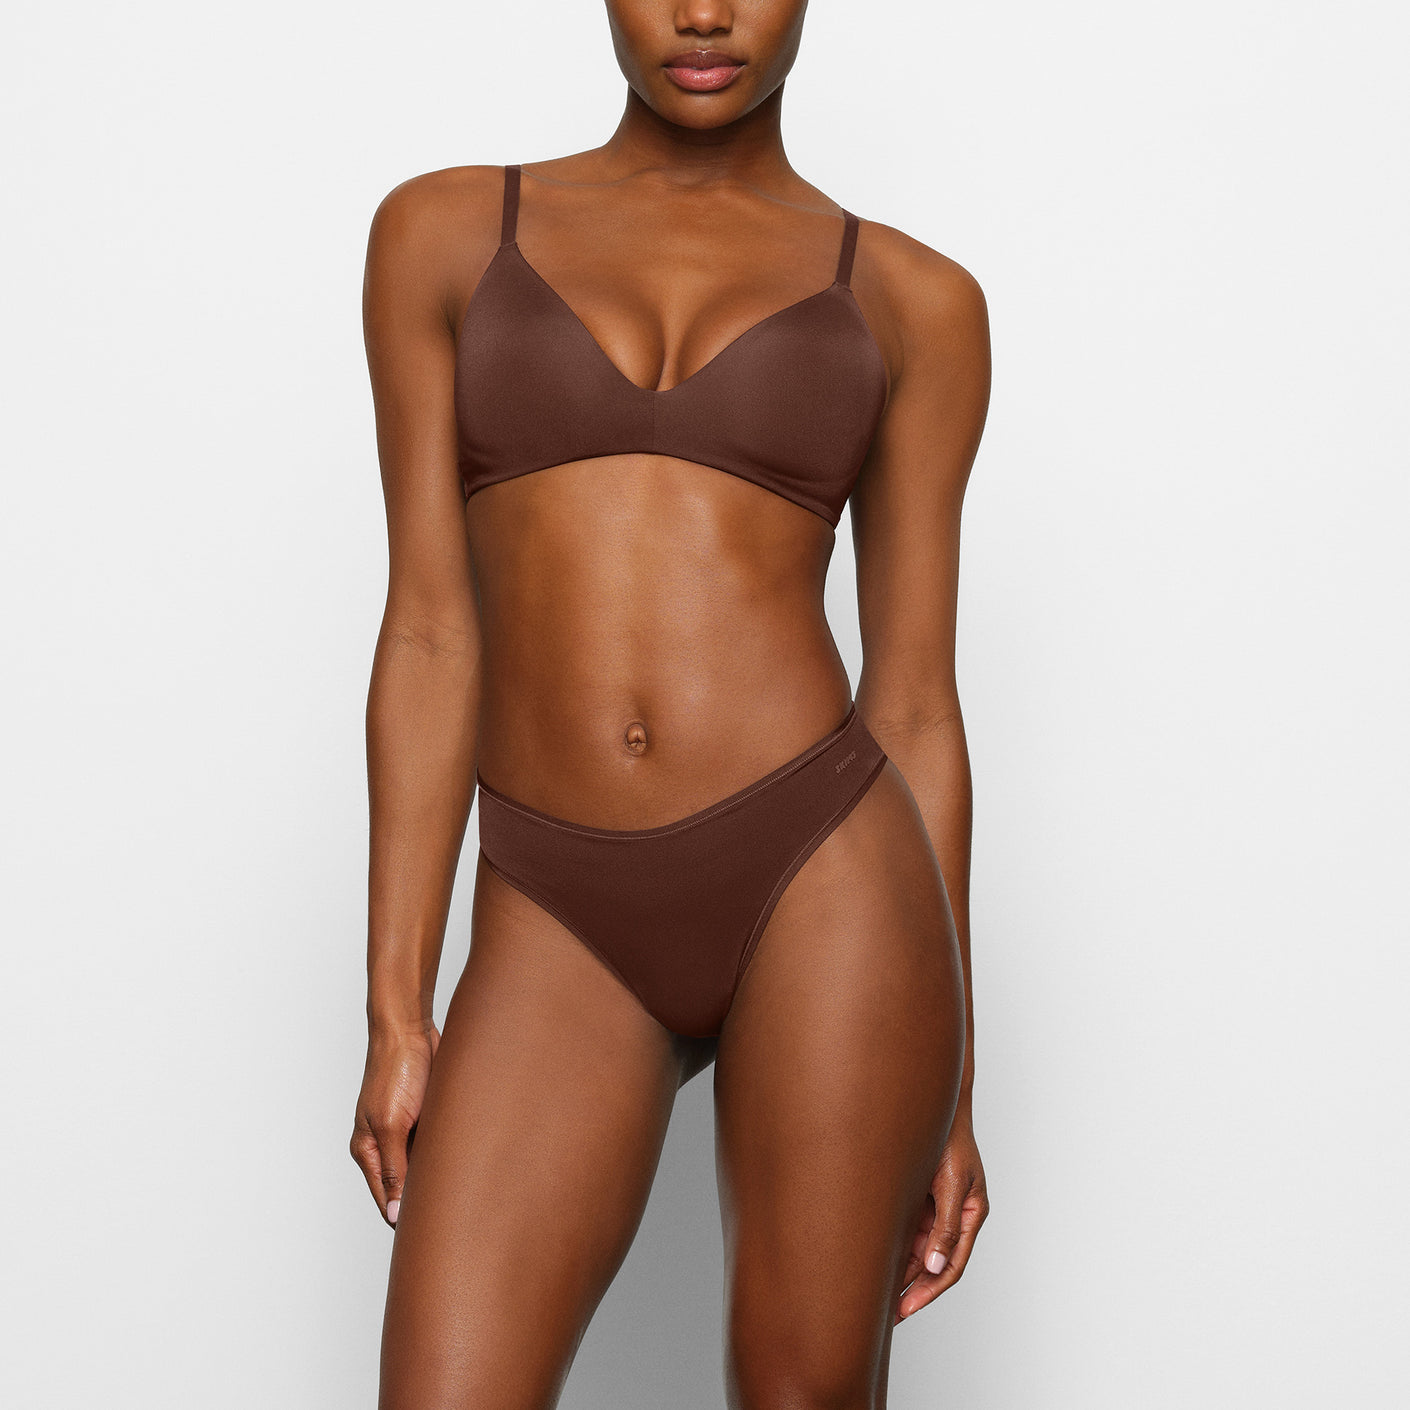 Track Wireless Form Push Up Plunge Bra - Cocoa - 34 - B at Skims